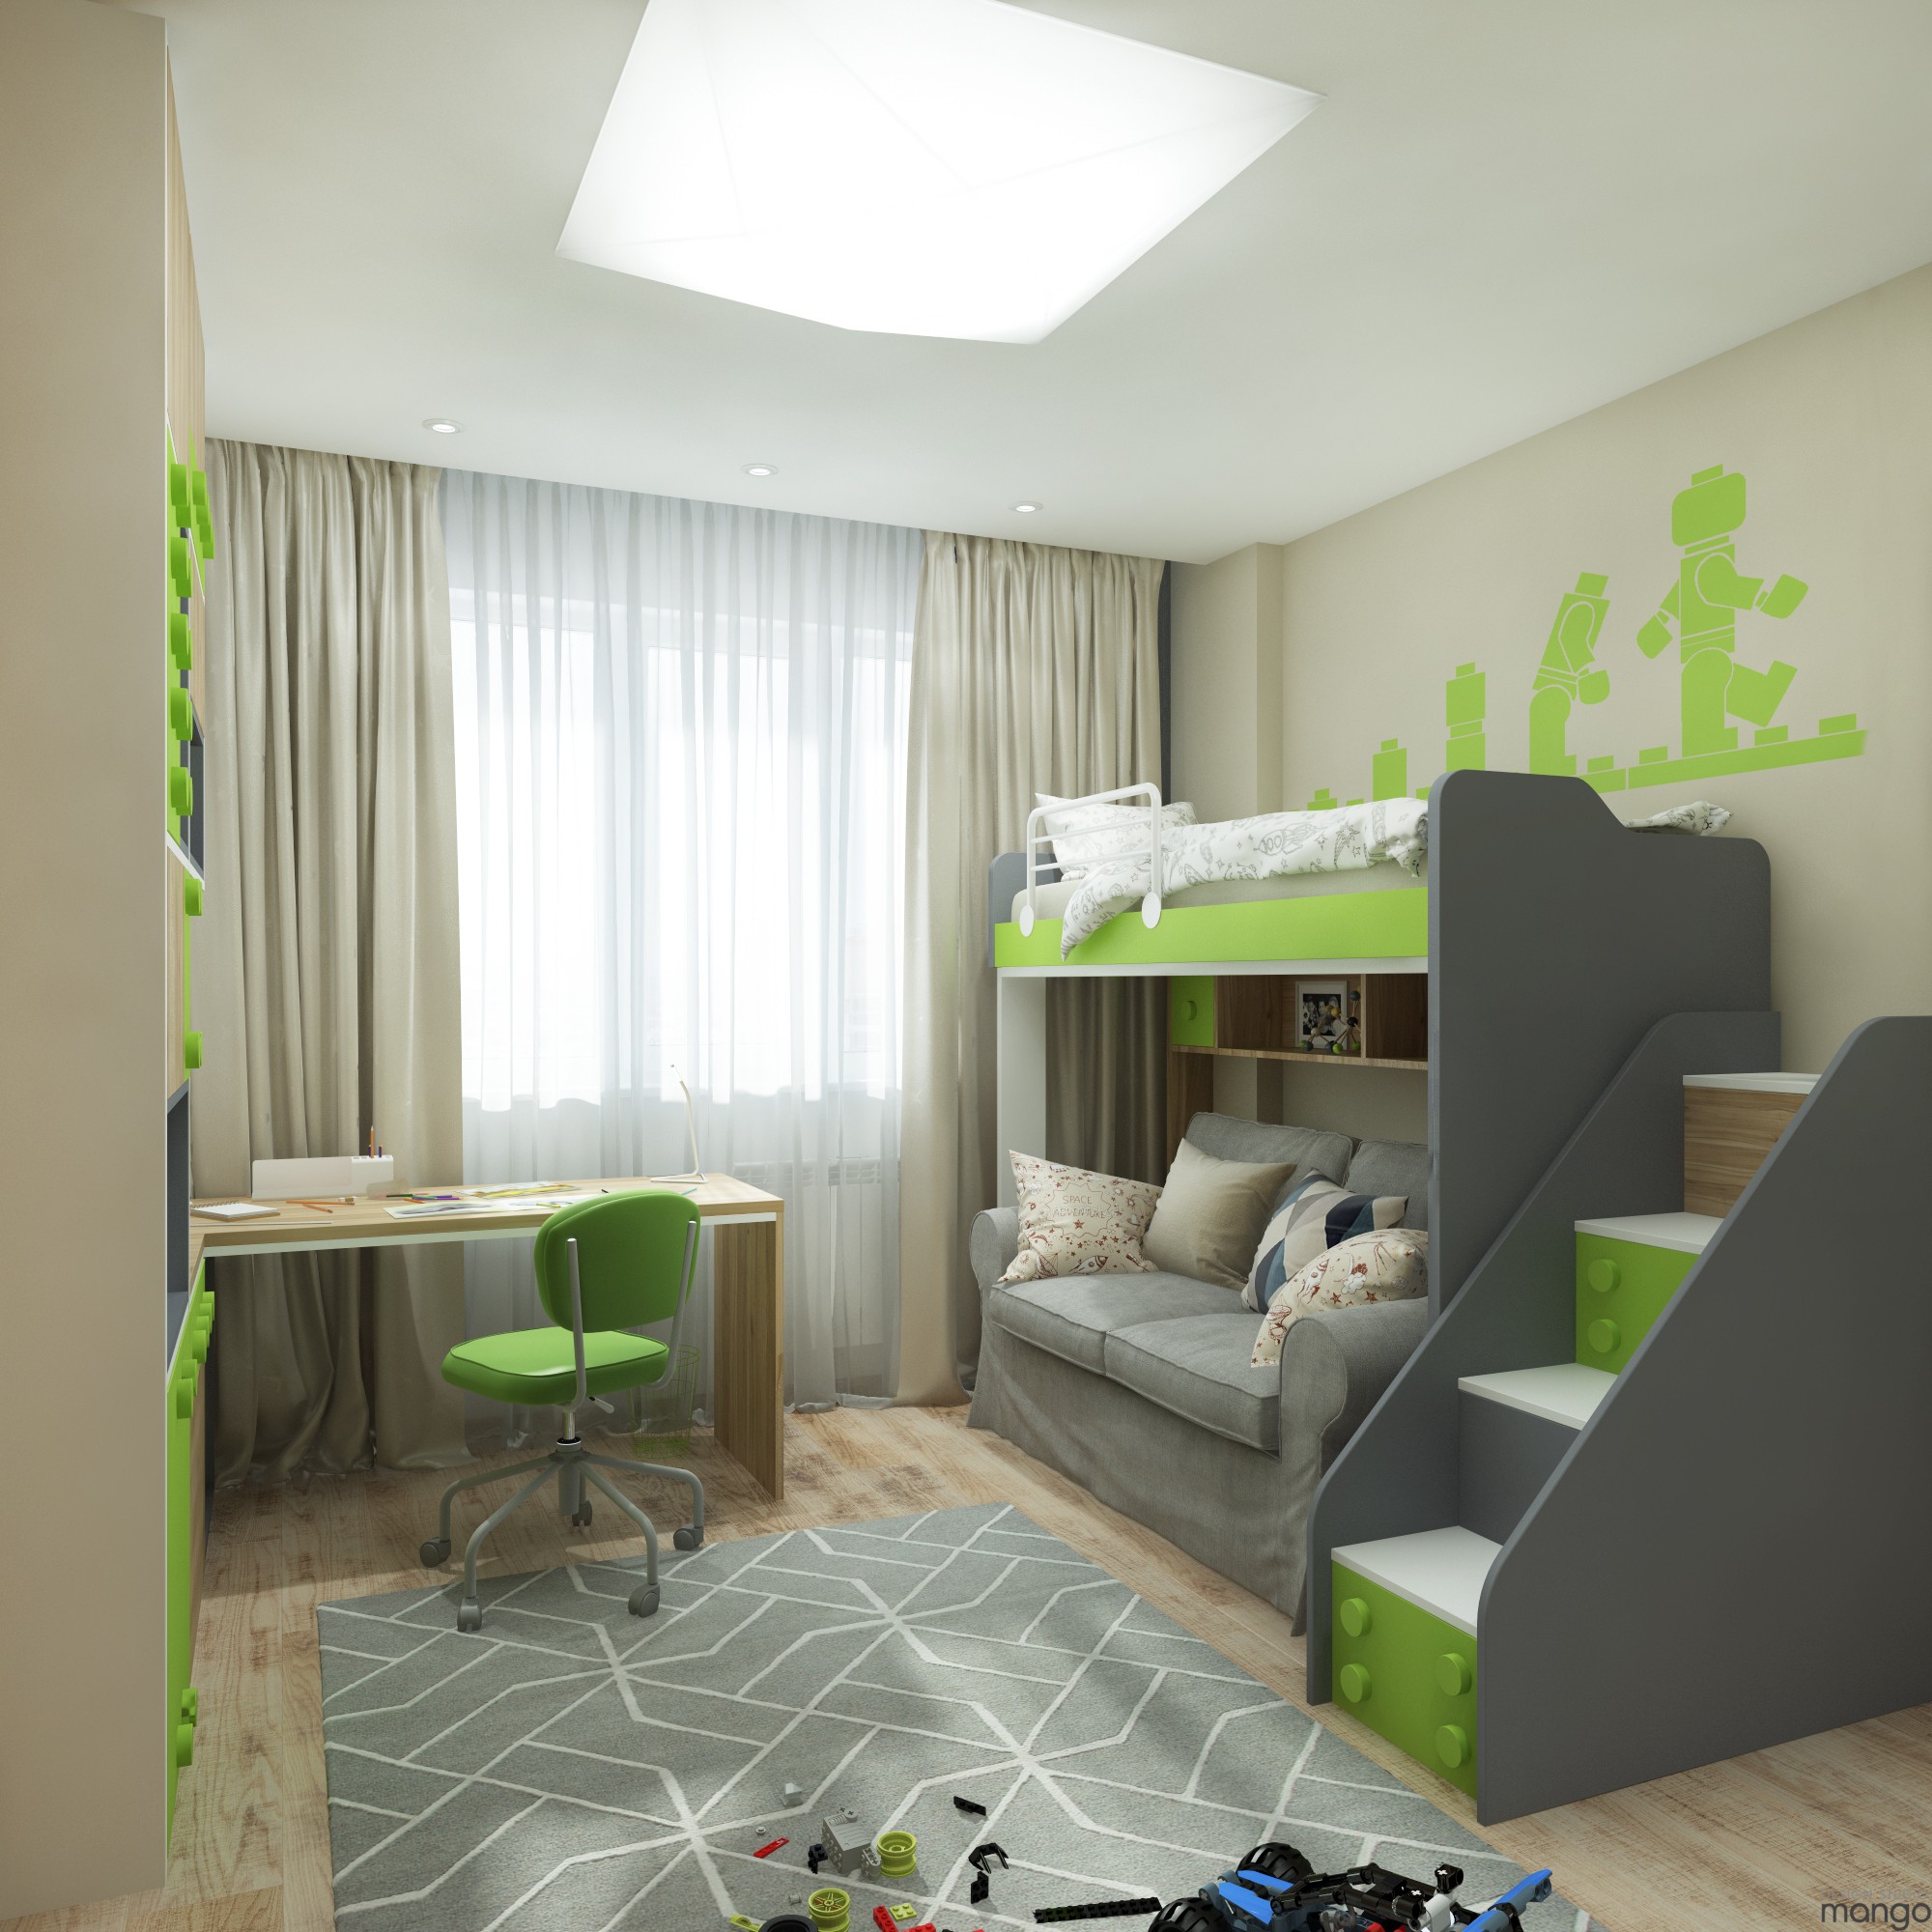 Boys bedroom design "width =" 2000 "height =" 2000 "srcset =" https://mileray.com/wp-content/uploads/2020/05/1588509259_900_Top-Tips-How-To-Create-Kids-Room-Designs-Which-Brimming.jpg 2000w, https: // mileray.com/wp-content/uploads/2016/09/Design-Studio-Mango9-1-150x150.jpg 150w, https://mileray.com/wp-content/uploads/2016/09/Design-Studio-Mango9 -1-300x300.jpg 300w, https://mileray.com/wp-content/uploads/2016/09/Design-Studio-Mango9-1-768x768.jpg 768w, https://mileray.com/wp-content /uploads/2016/09/Design-Studio-Mango9-1-1024x1024.jpg 1024w, https://mileray.com/wp-content/uploads/2016/09/Design-Studio-Mango9-1-696x696.jpg 696w , https://mileray.com/wp-content/uploads/2016/09/Design-Studio-Mango9-1-1068x1068.jpg 1068w, https://mileray.com/wp-content/uploads/2016/09/ Design-Studio-Mango9-1-420x420.jpg 420w "sizes =" (maximum width: 2000px) 100vw, 2000px